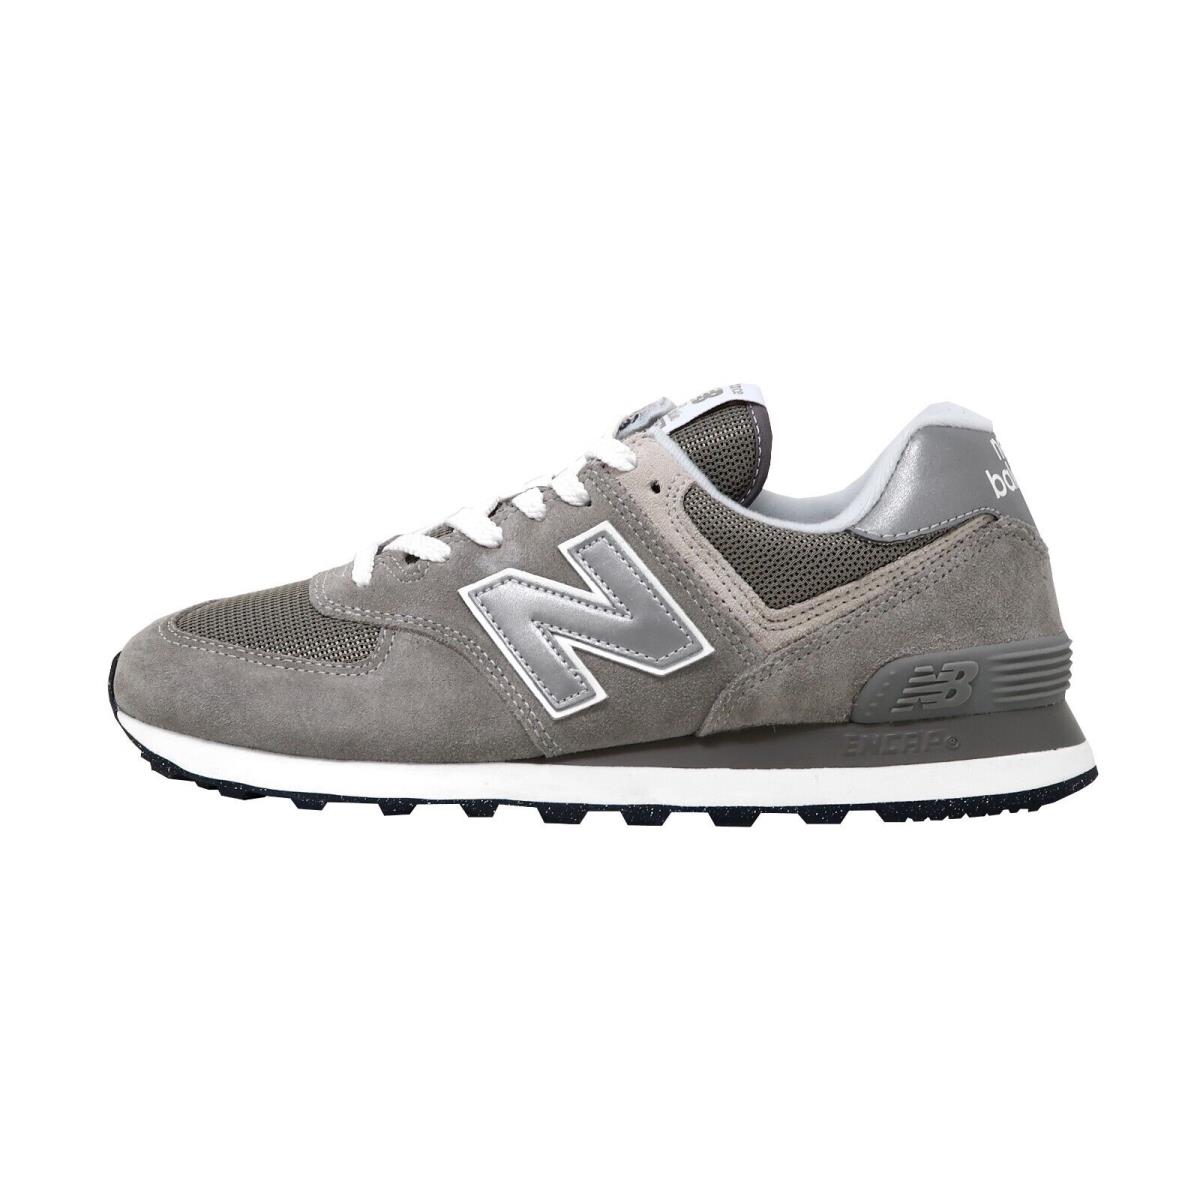 New Balance Men`s 574 Core Classic Shoes Sneakers ML574EVG - Grey/white